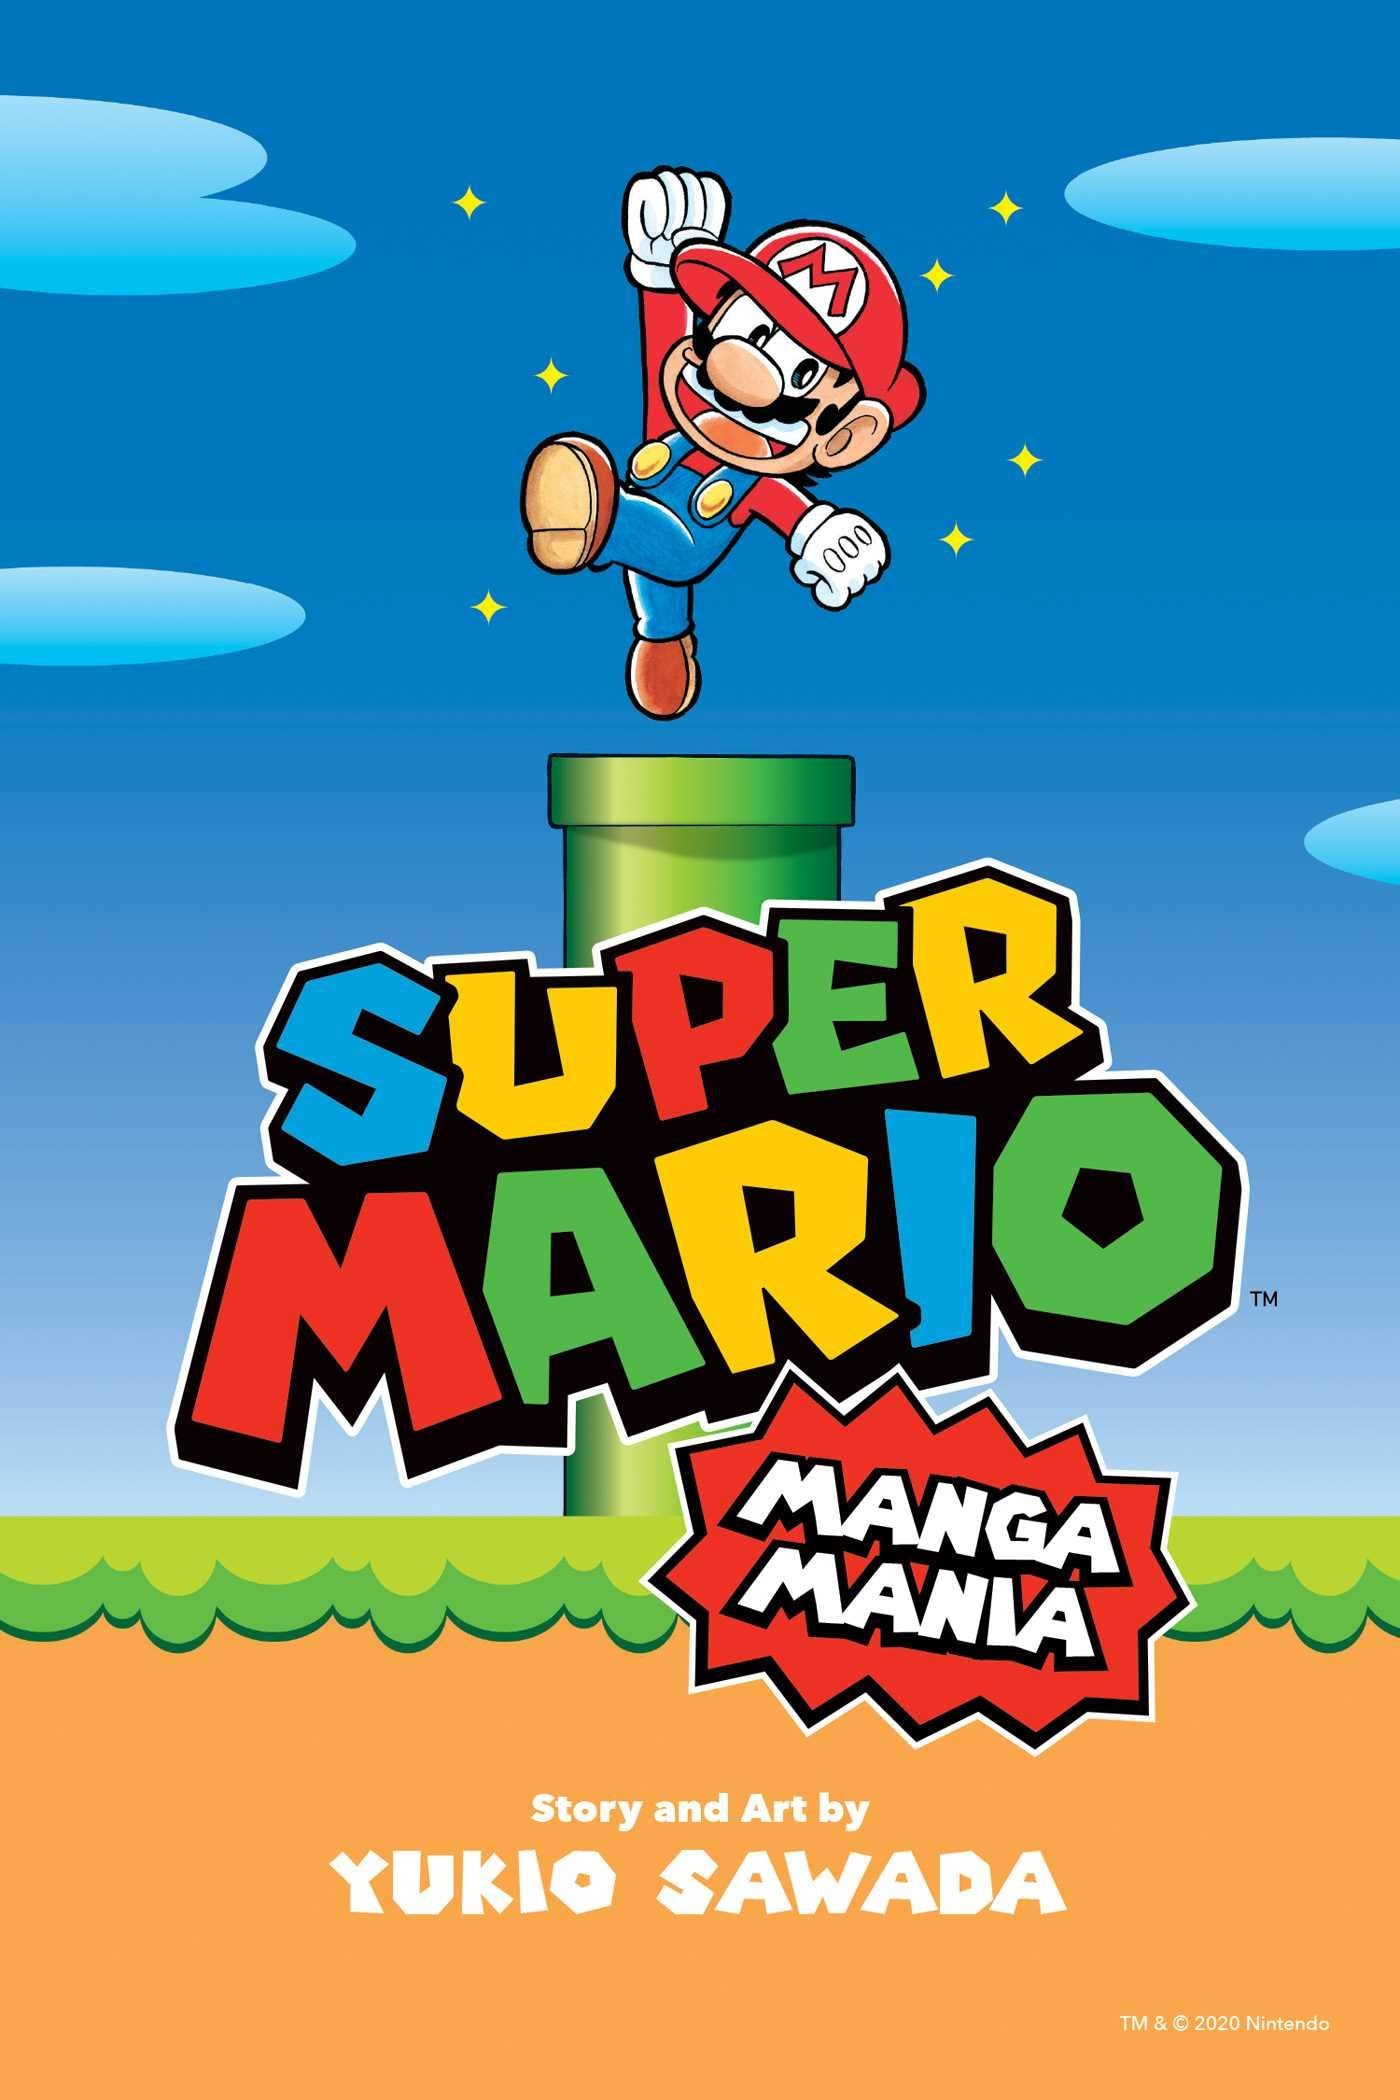 Japan S Super Mario Kun Manga Series Gets An English Language Release For The First Time Nintendo Life